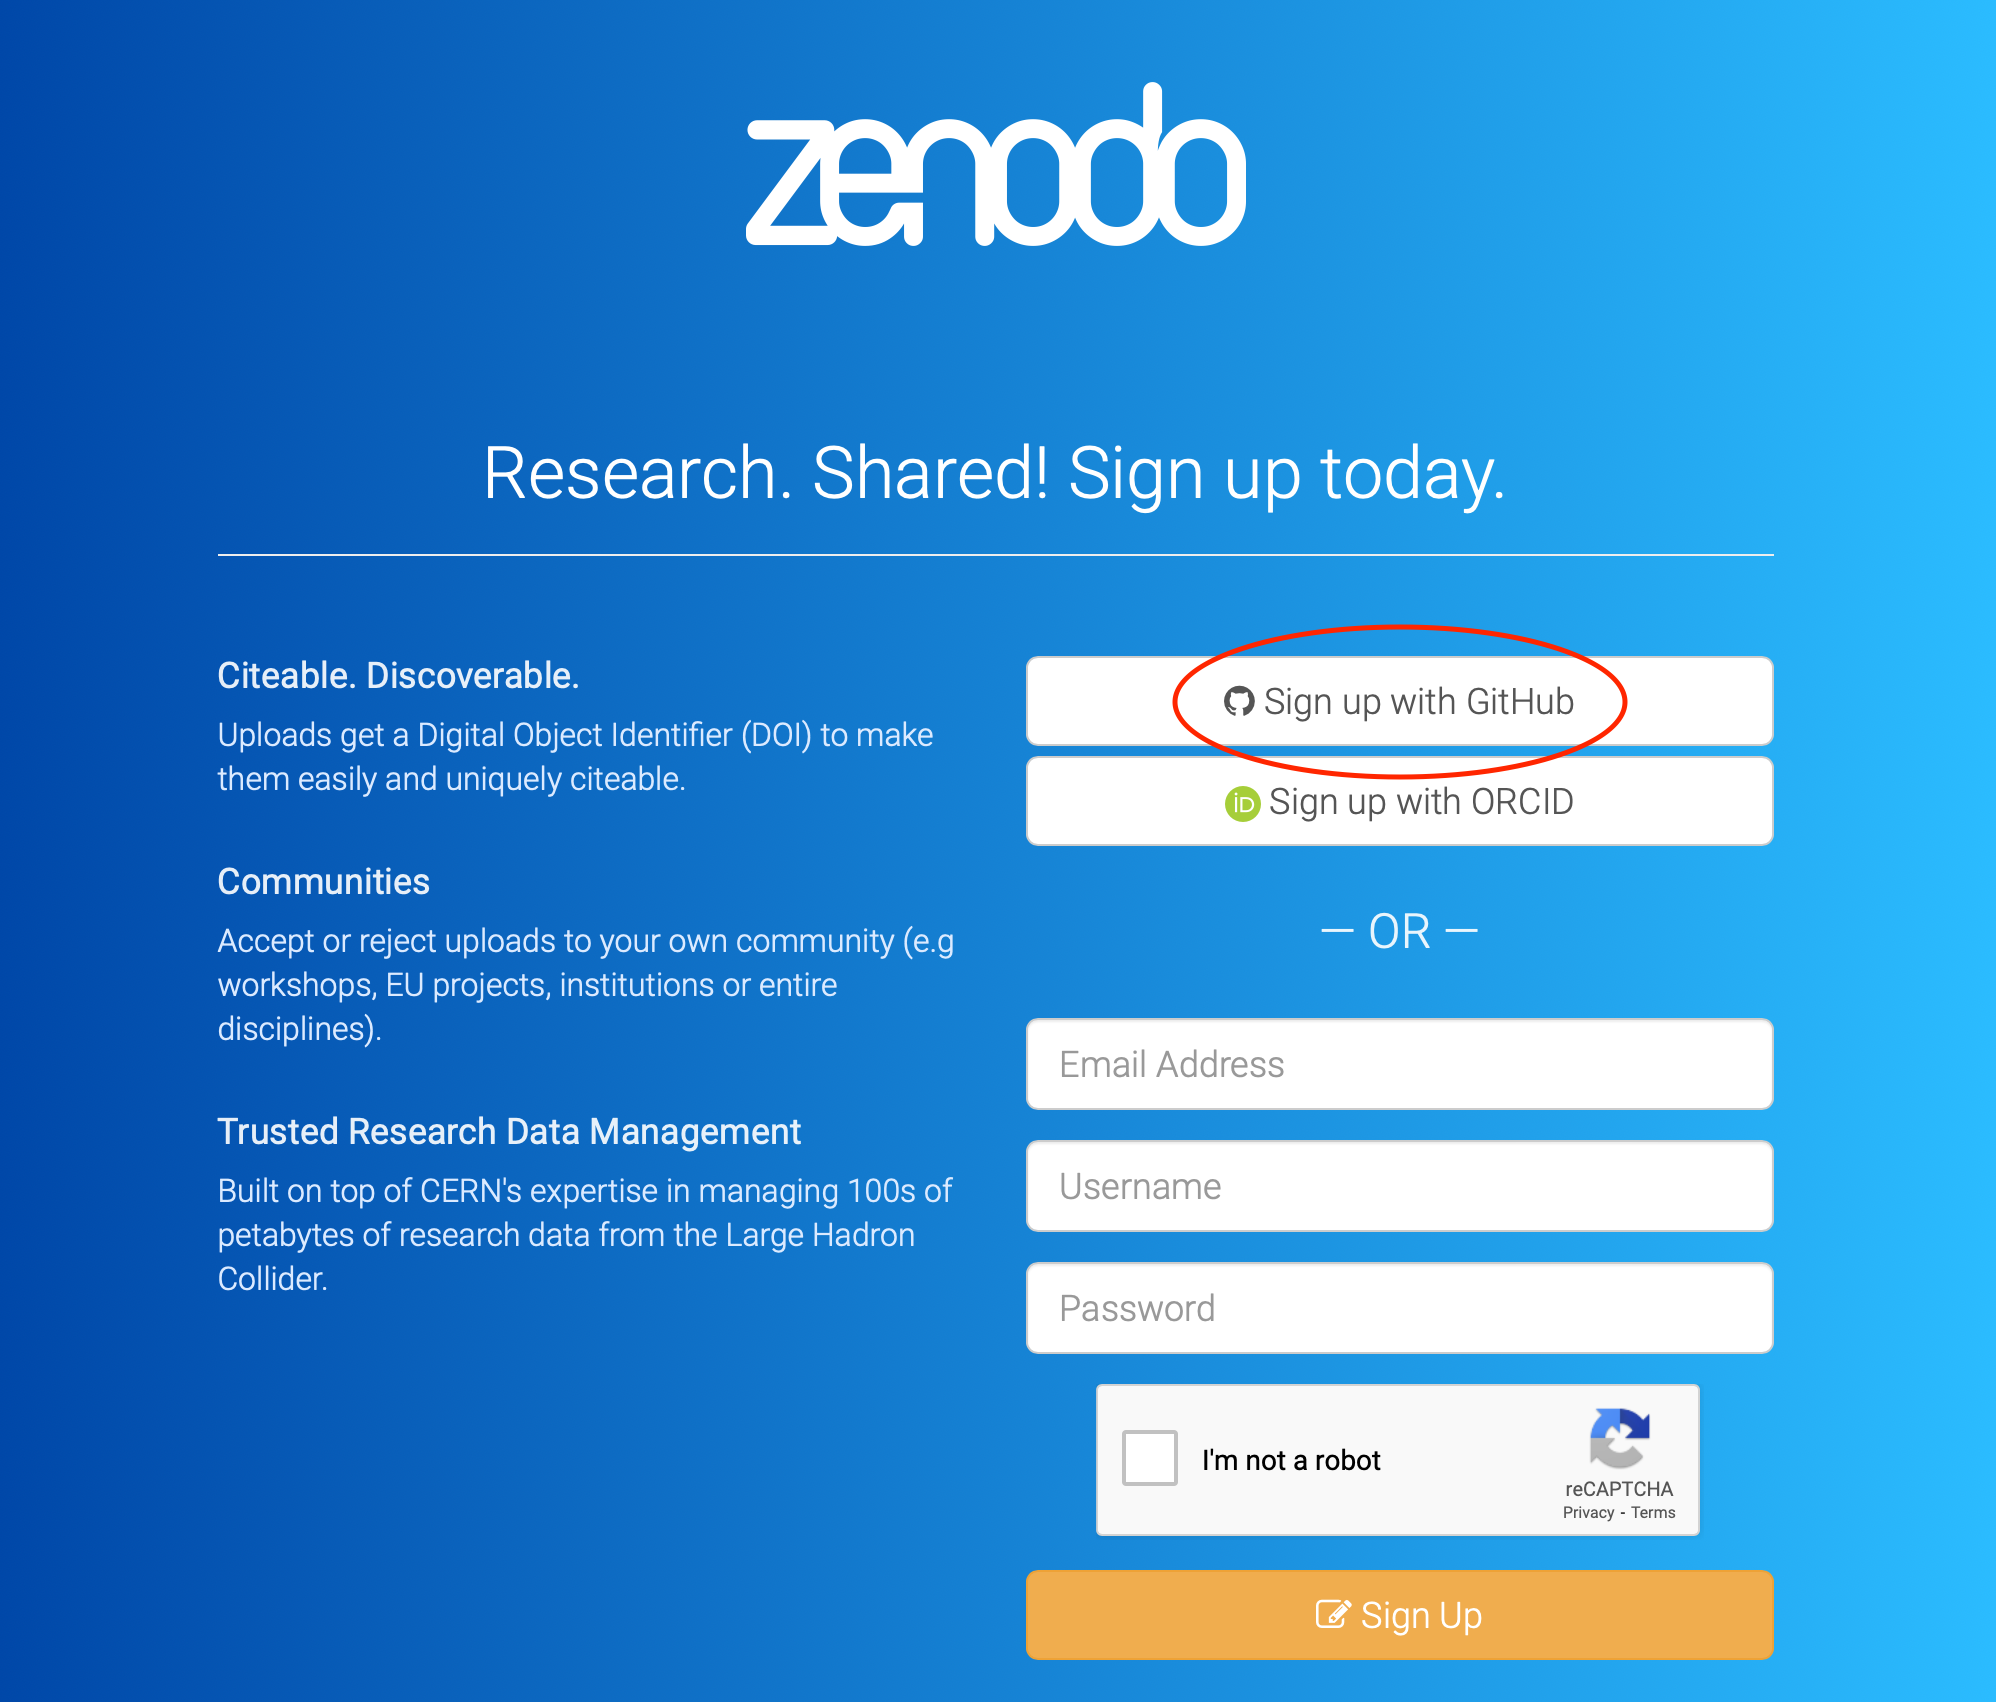 Screen shot of the Zenodo signup pagem, with the "Sign up with GitHub" button circled